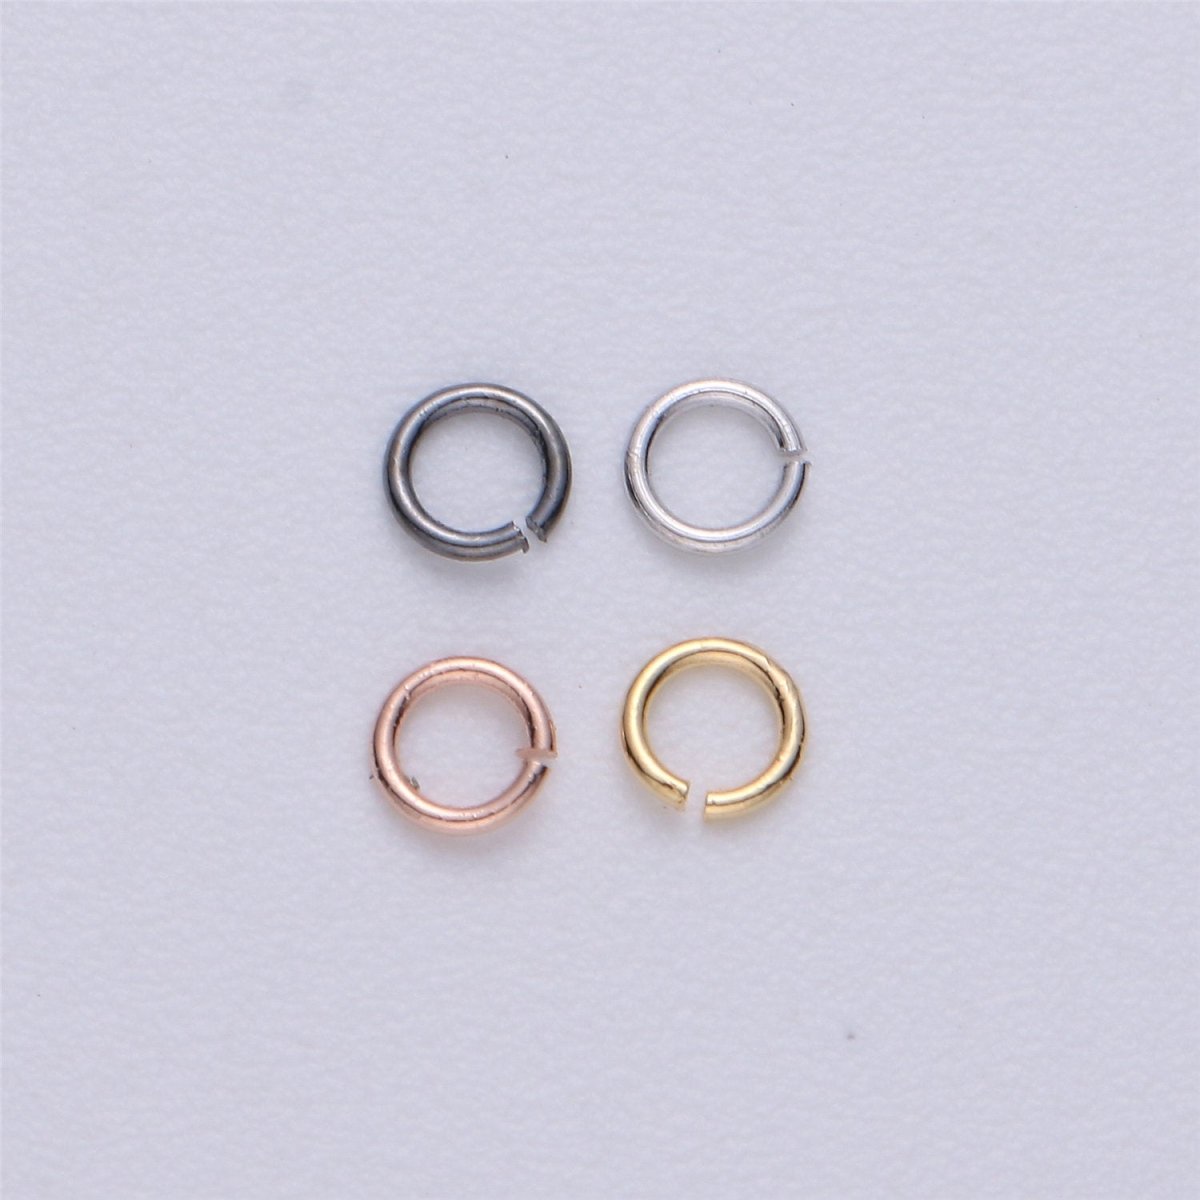 450 Pcs Silver Plated, Gold Plated, Gun Metal, Rose Gold Dainty O Shaped Jump Rings 3mm Open Jump Ring 24 gauge 0.50mm for Supply - DLUXCA